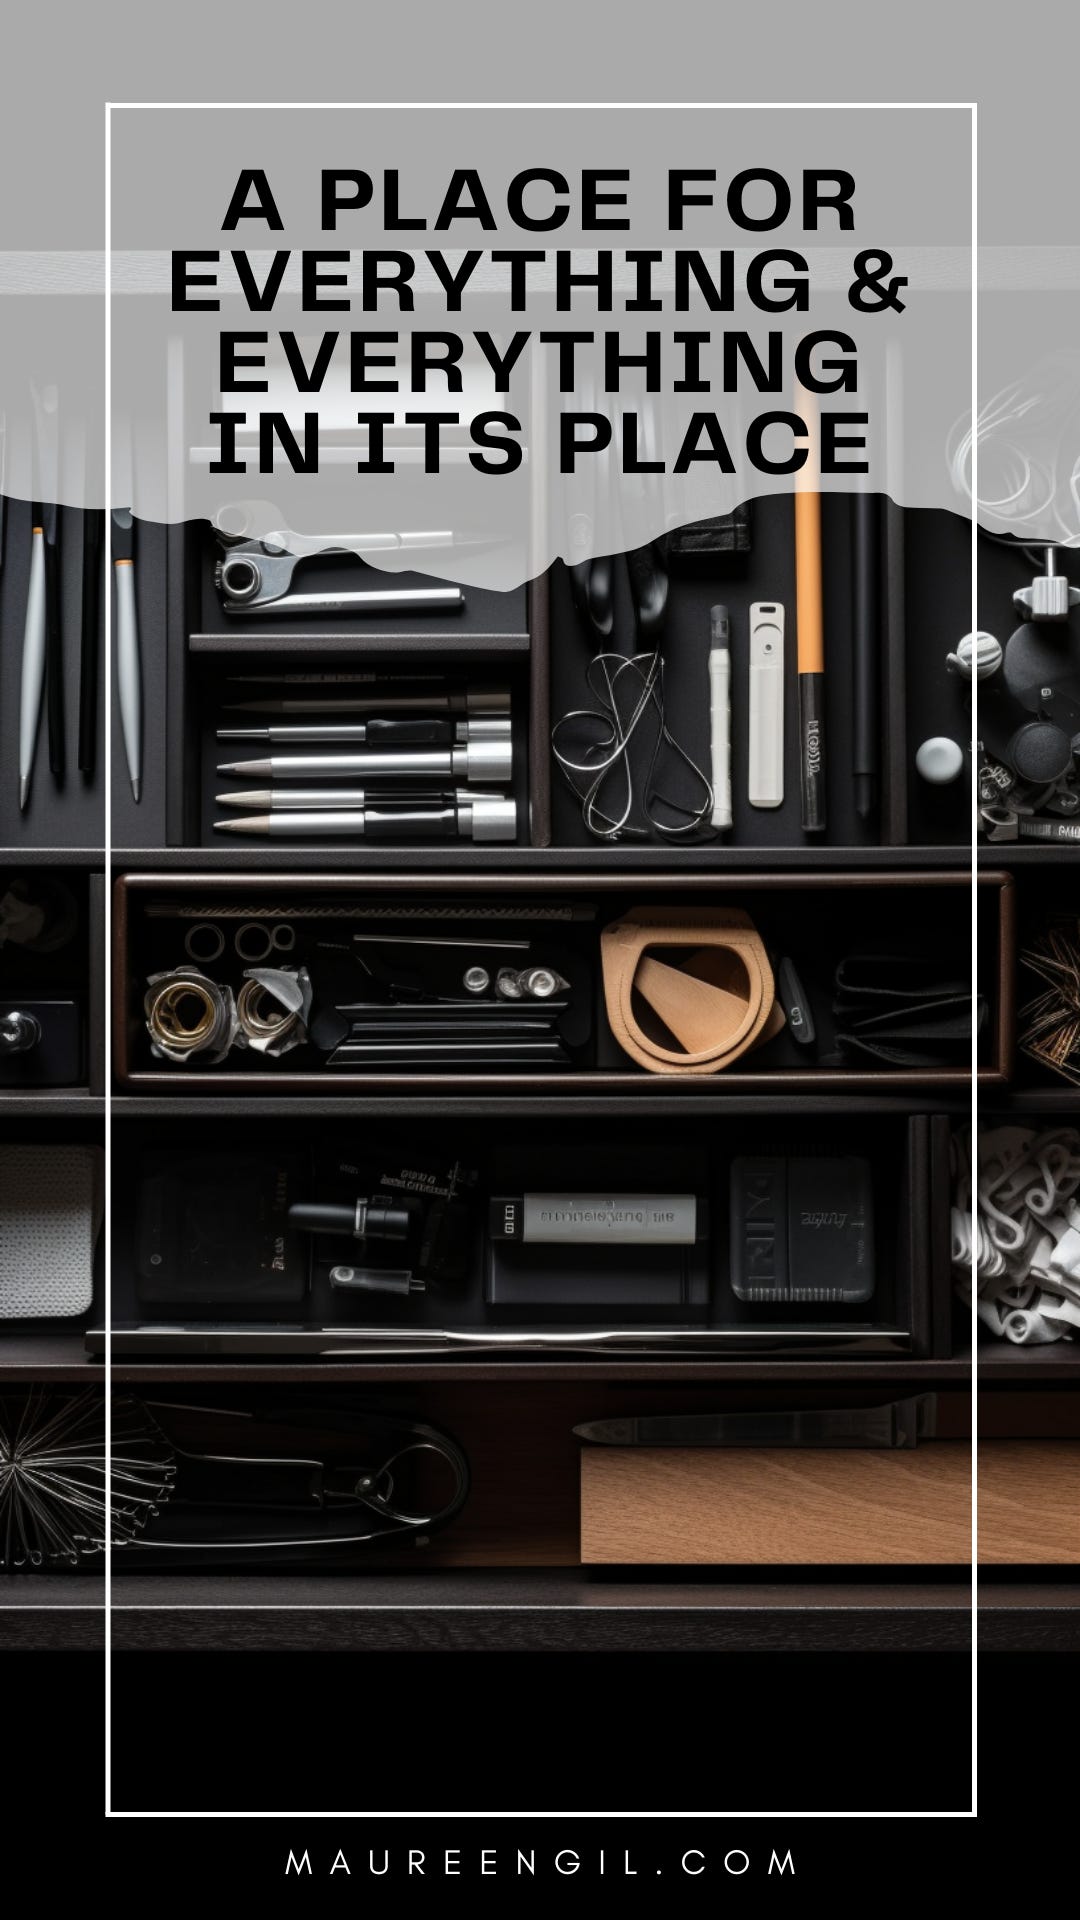 Stop losing your tape measures and start organizing with our tips! Learn how to declutter and create a dedicated location for your measuring tools.